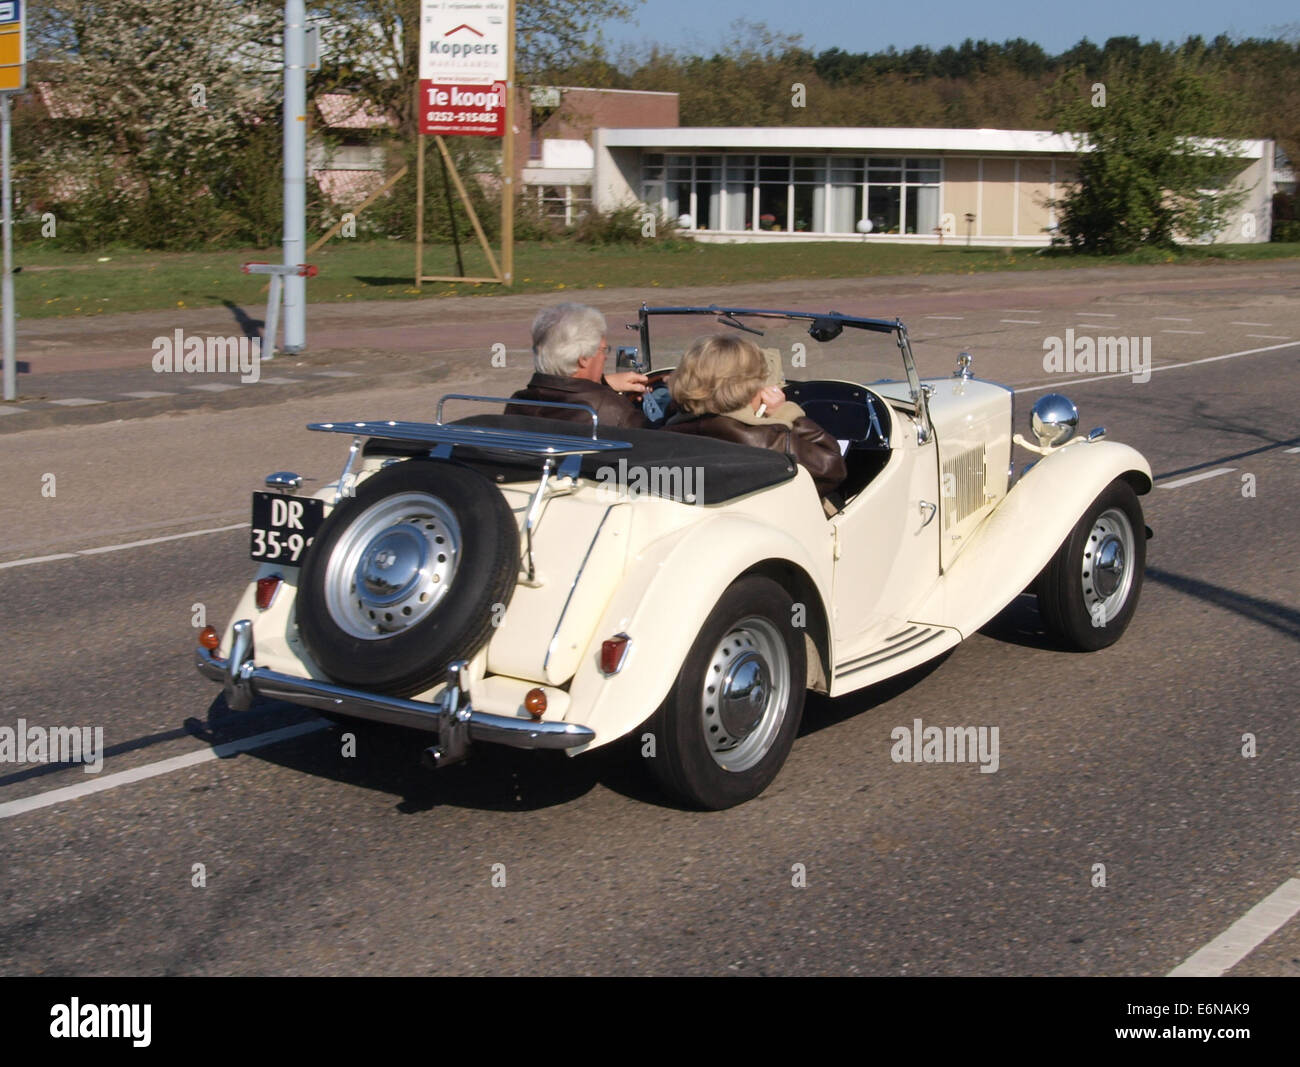 MG TD (1951). Dutch licence registration DR-35-98, pic5 Stock Photo